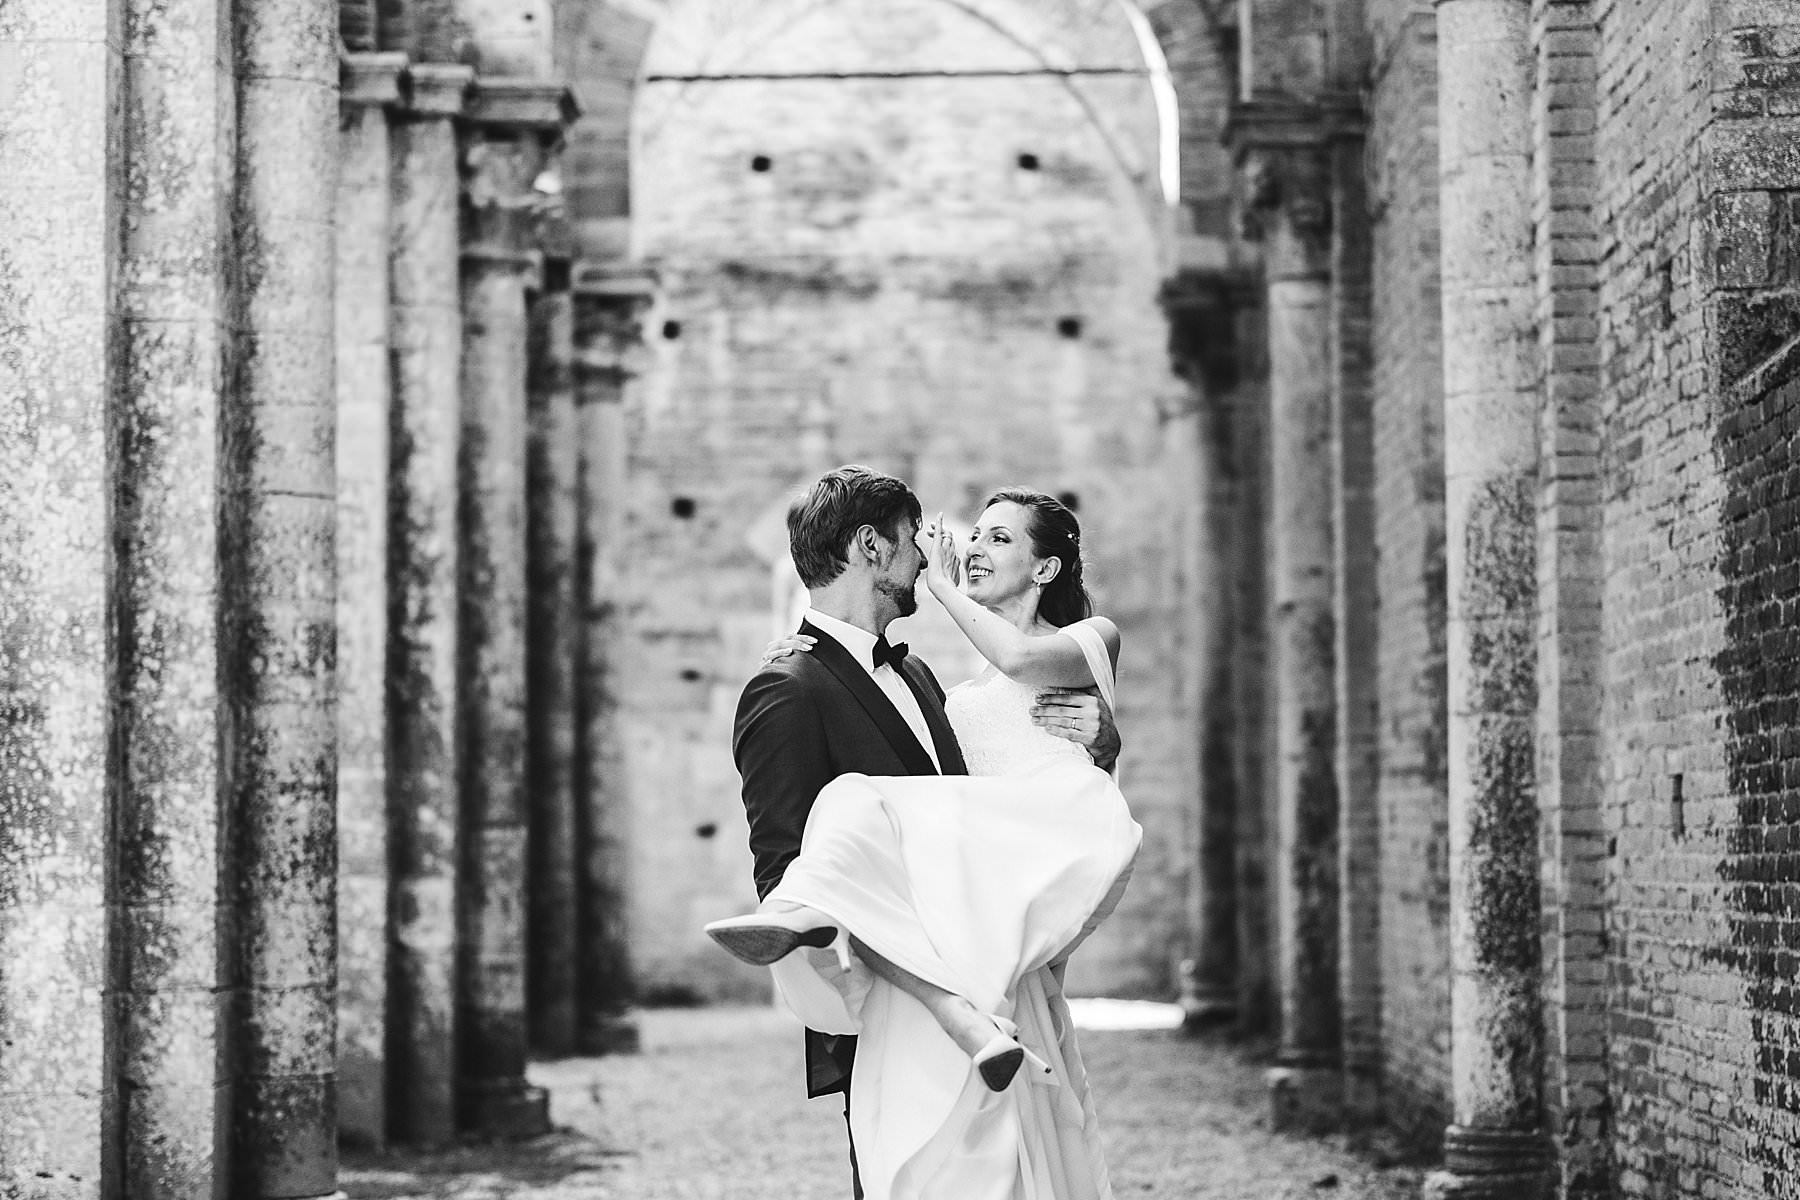 Candid spontaneous elegant wedding photography in the heart of Tuscany at Roofless Abbey of San Galgano near Siena